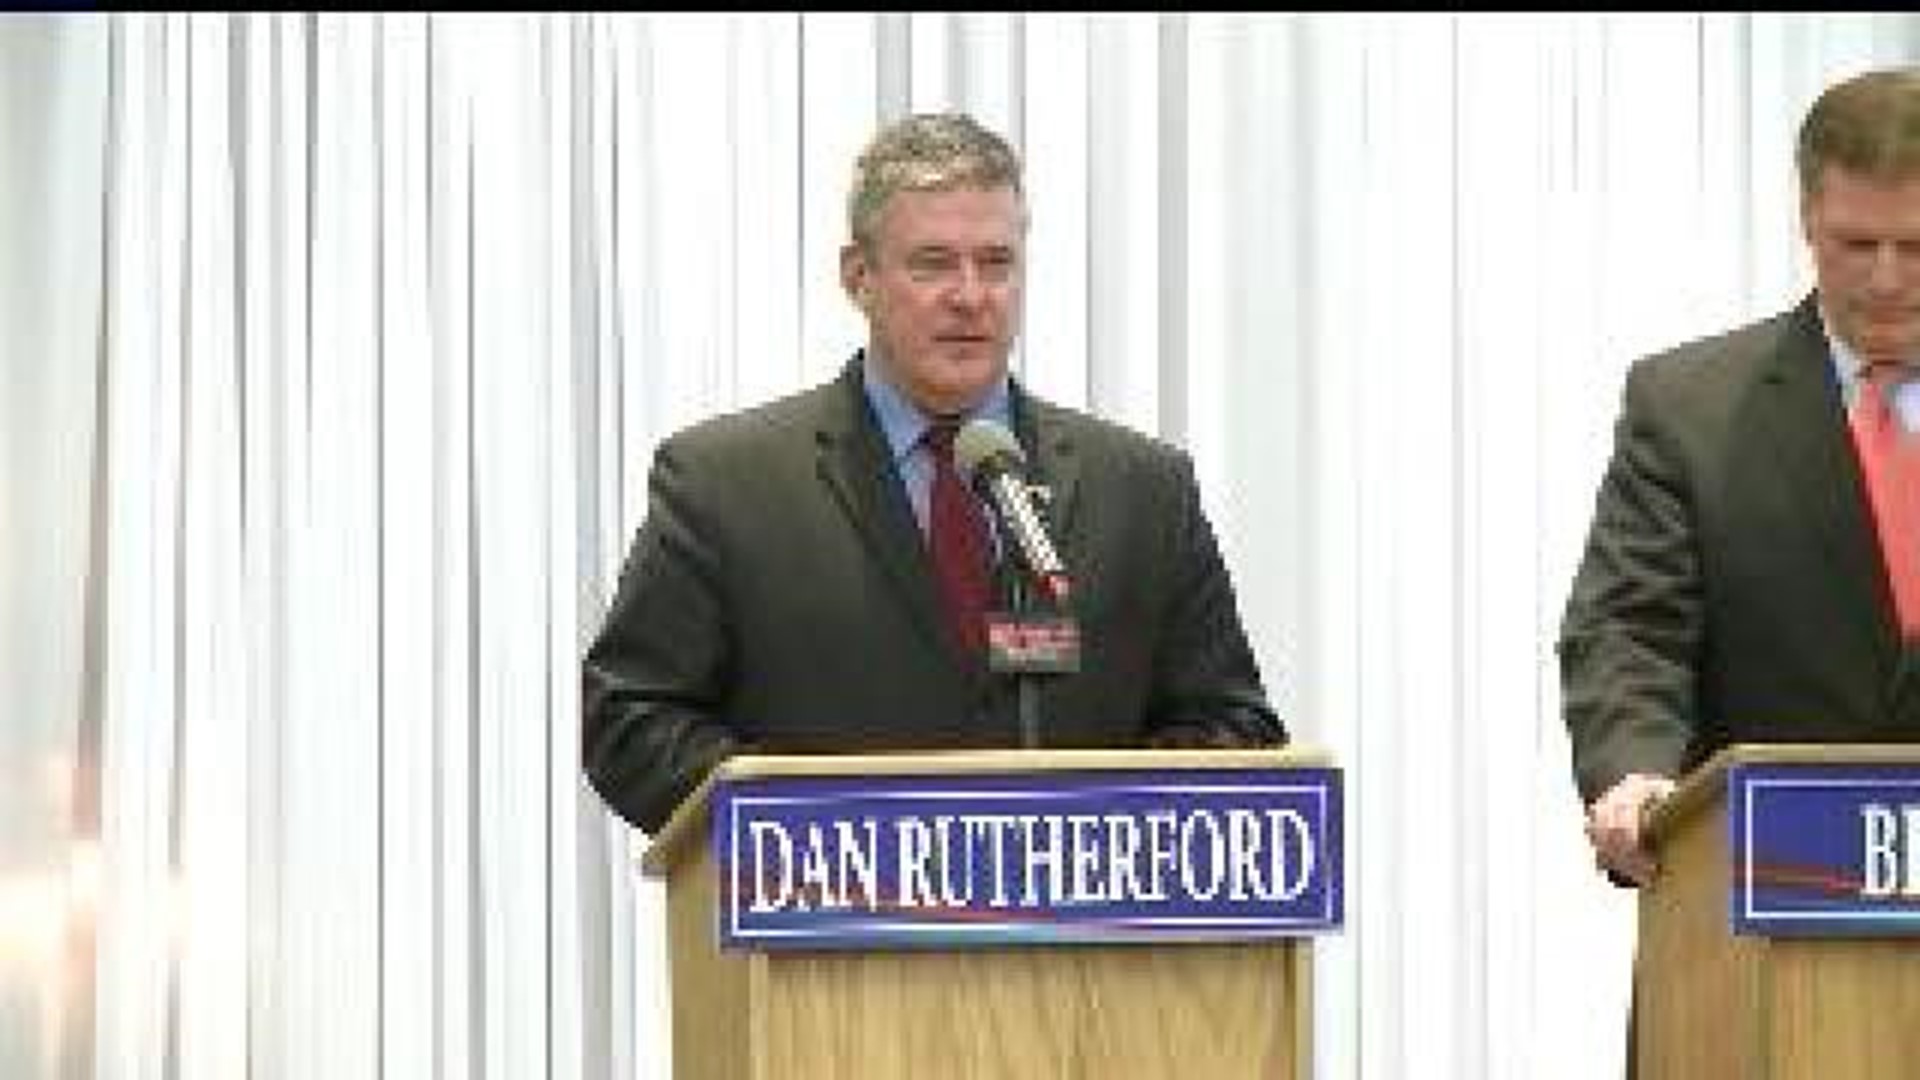 Local Rutherford supporter says allegations are false